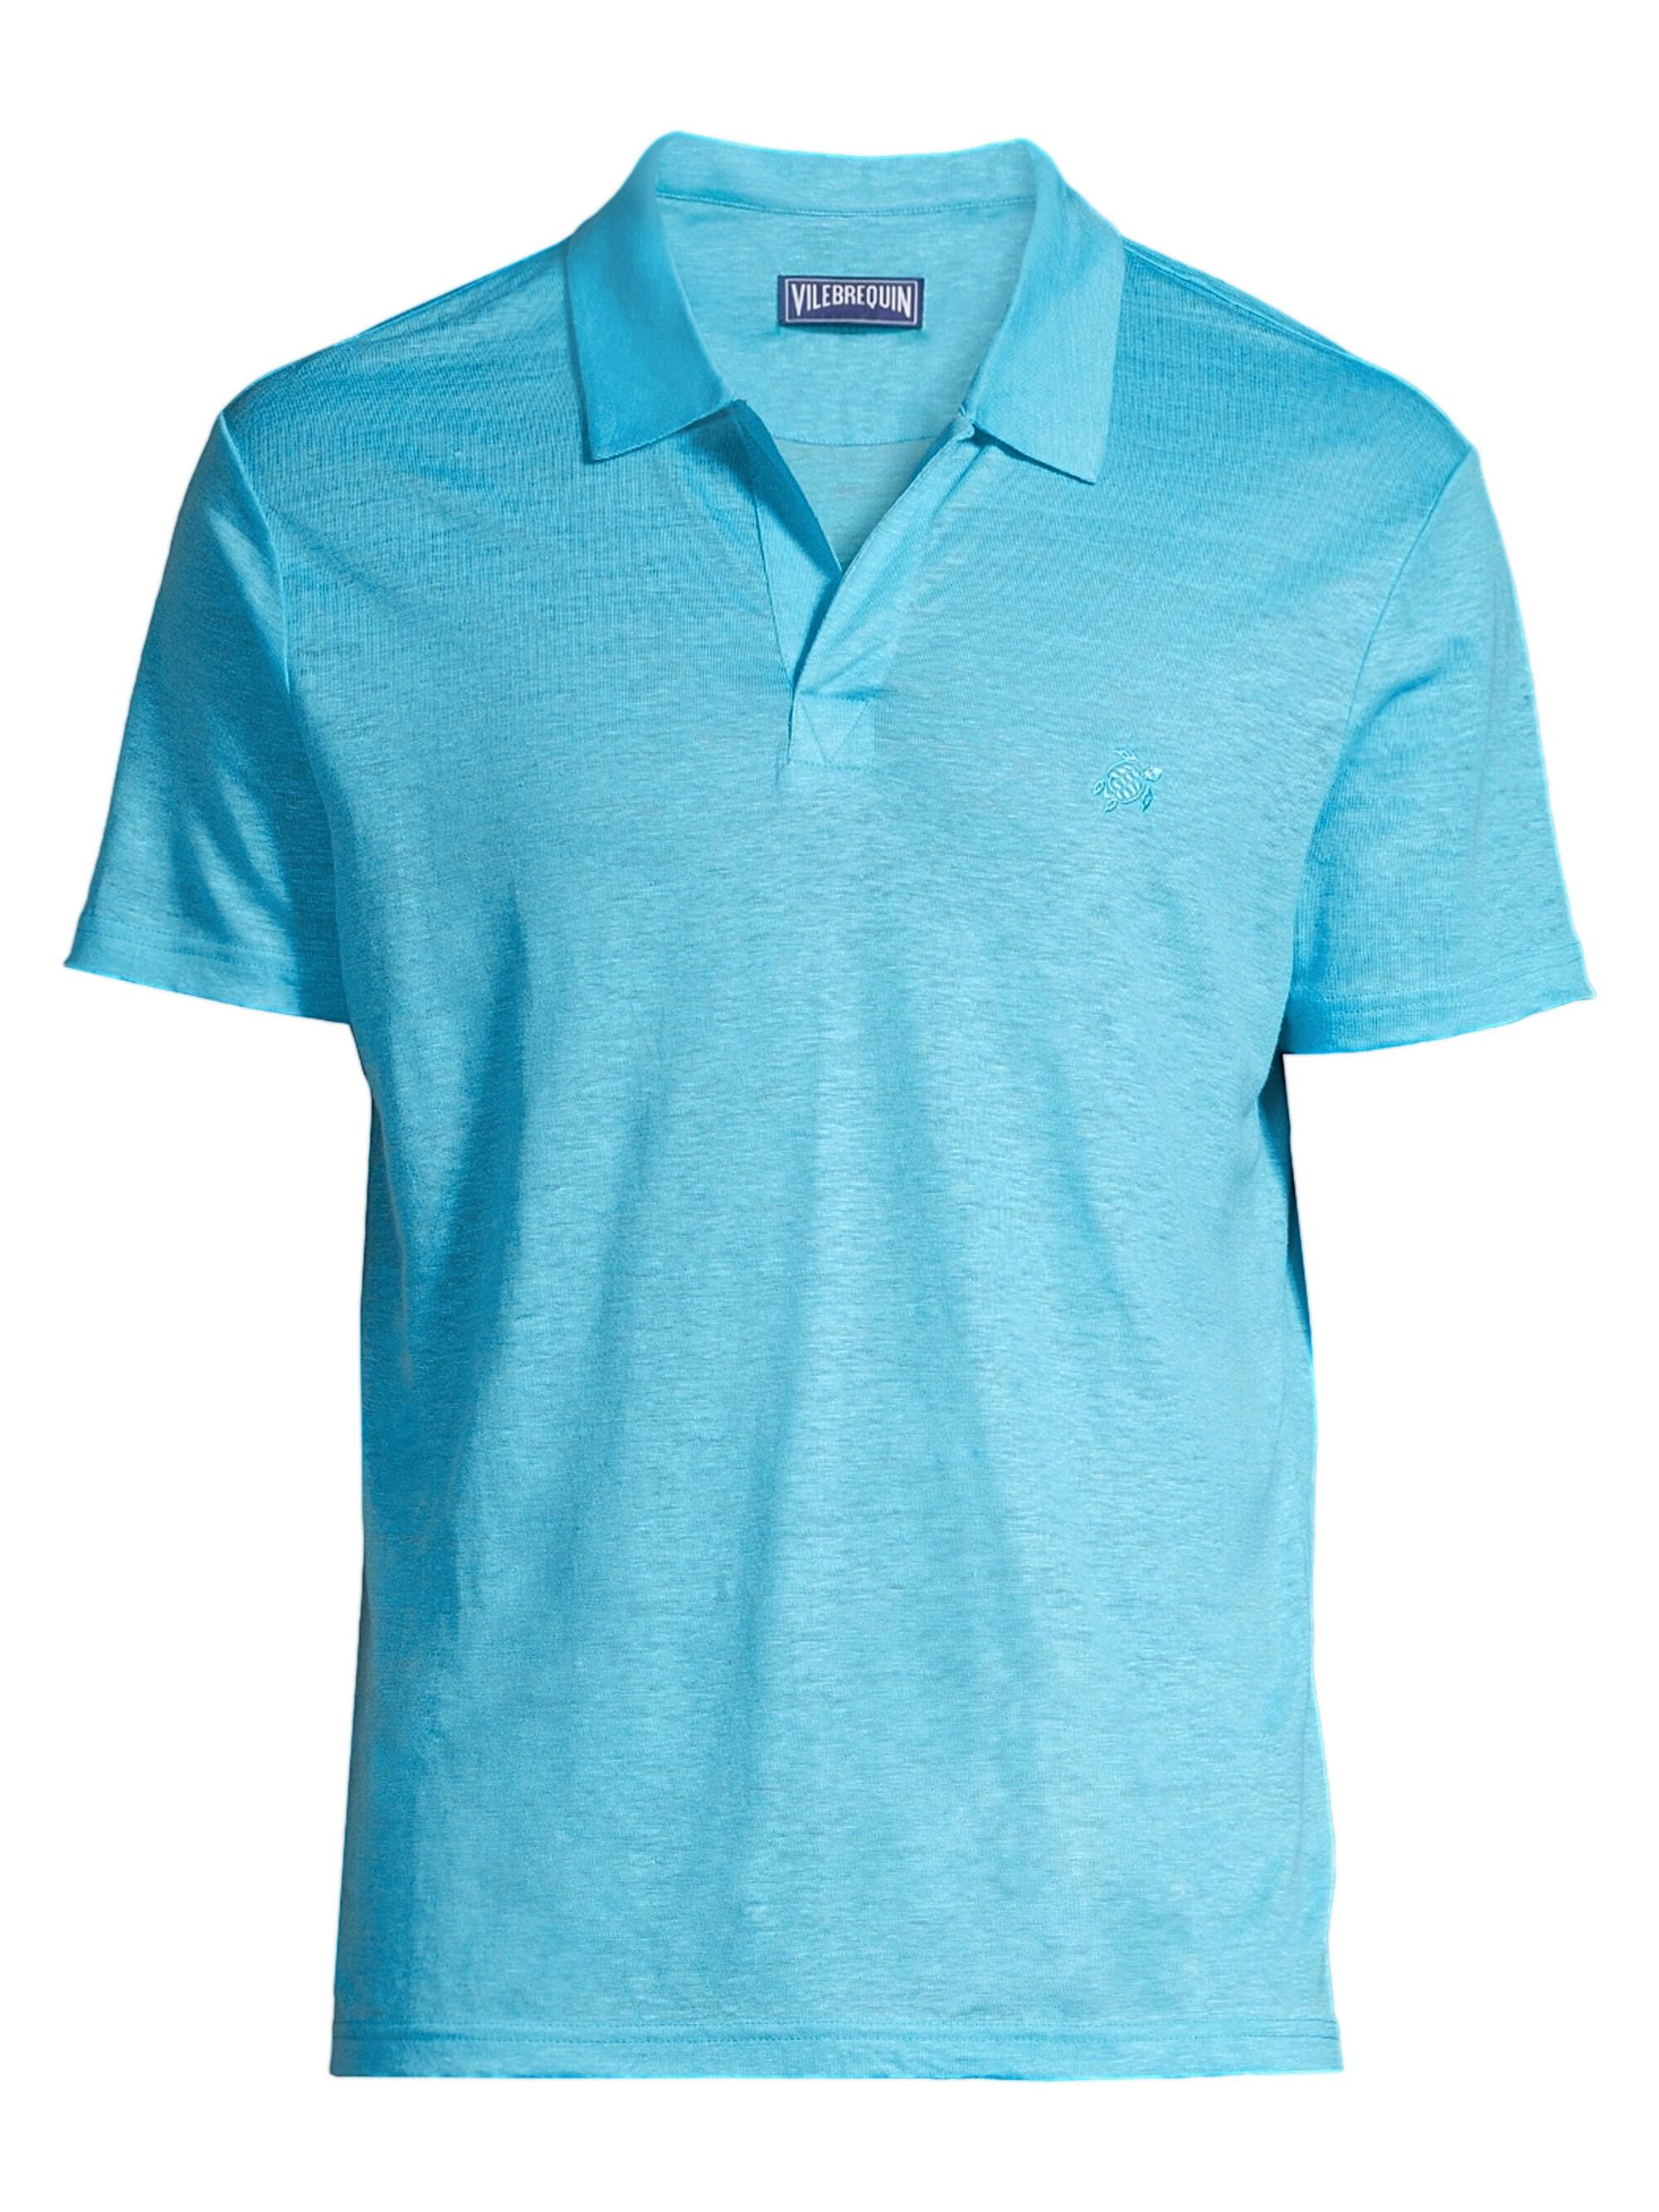 Vilebrequin Pyramid Linen Polo Shirt in Blue for Men - Lyst